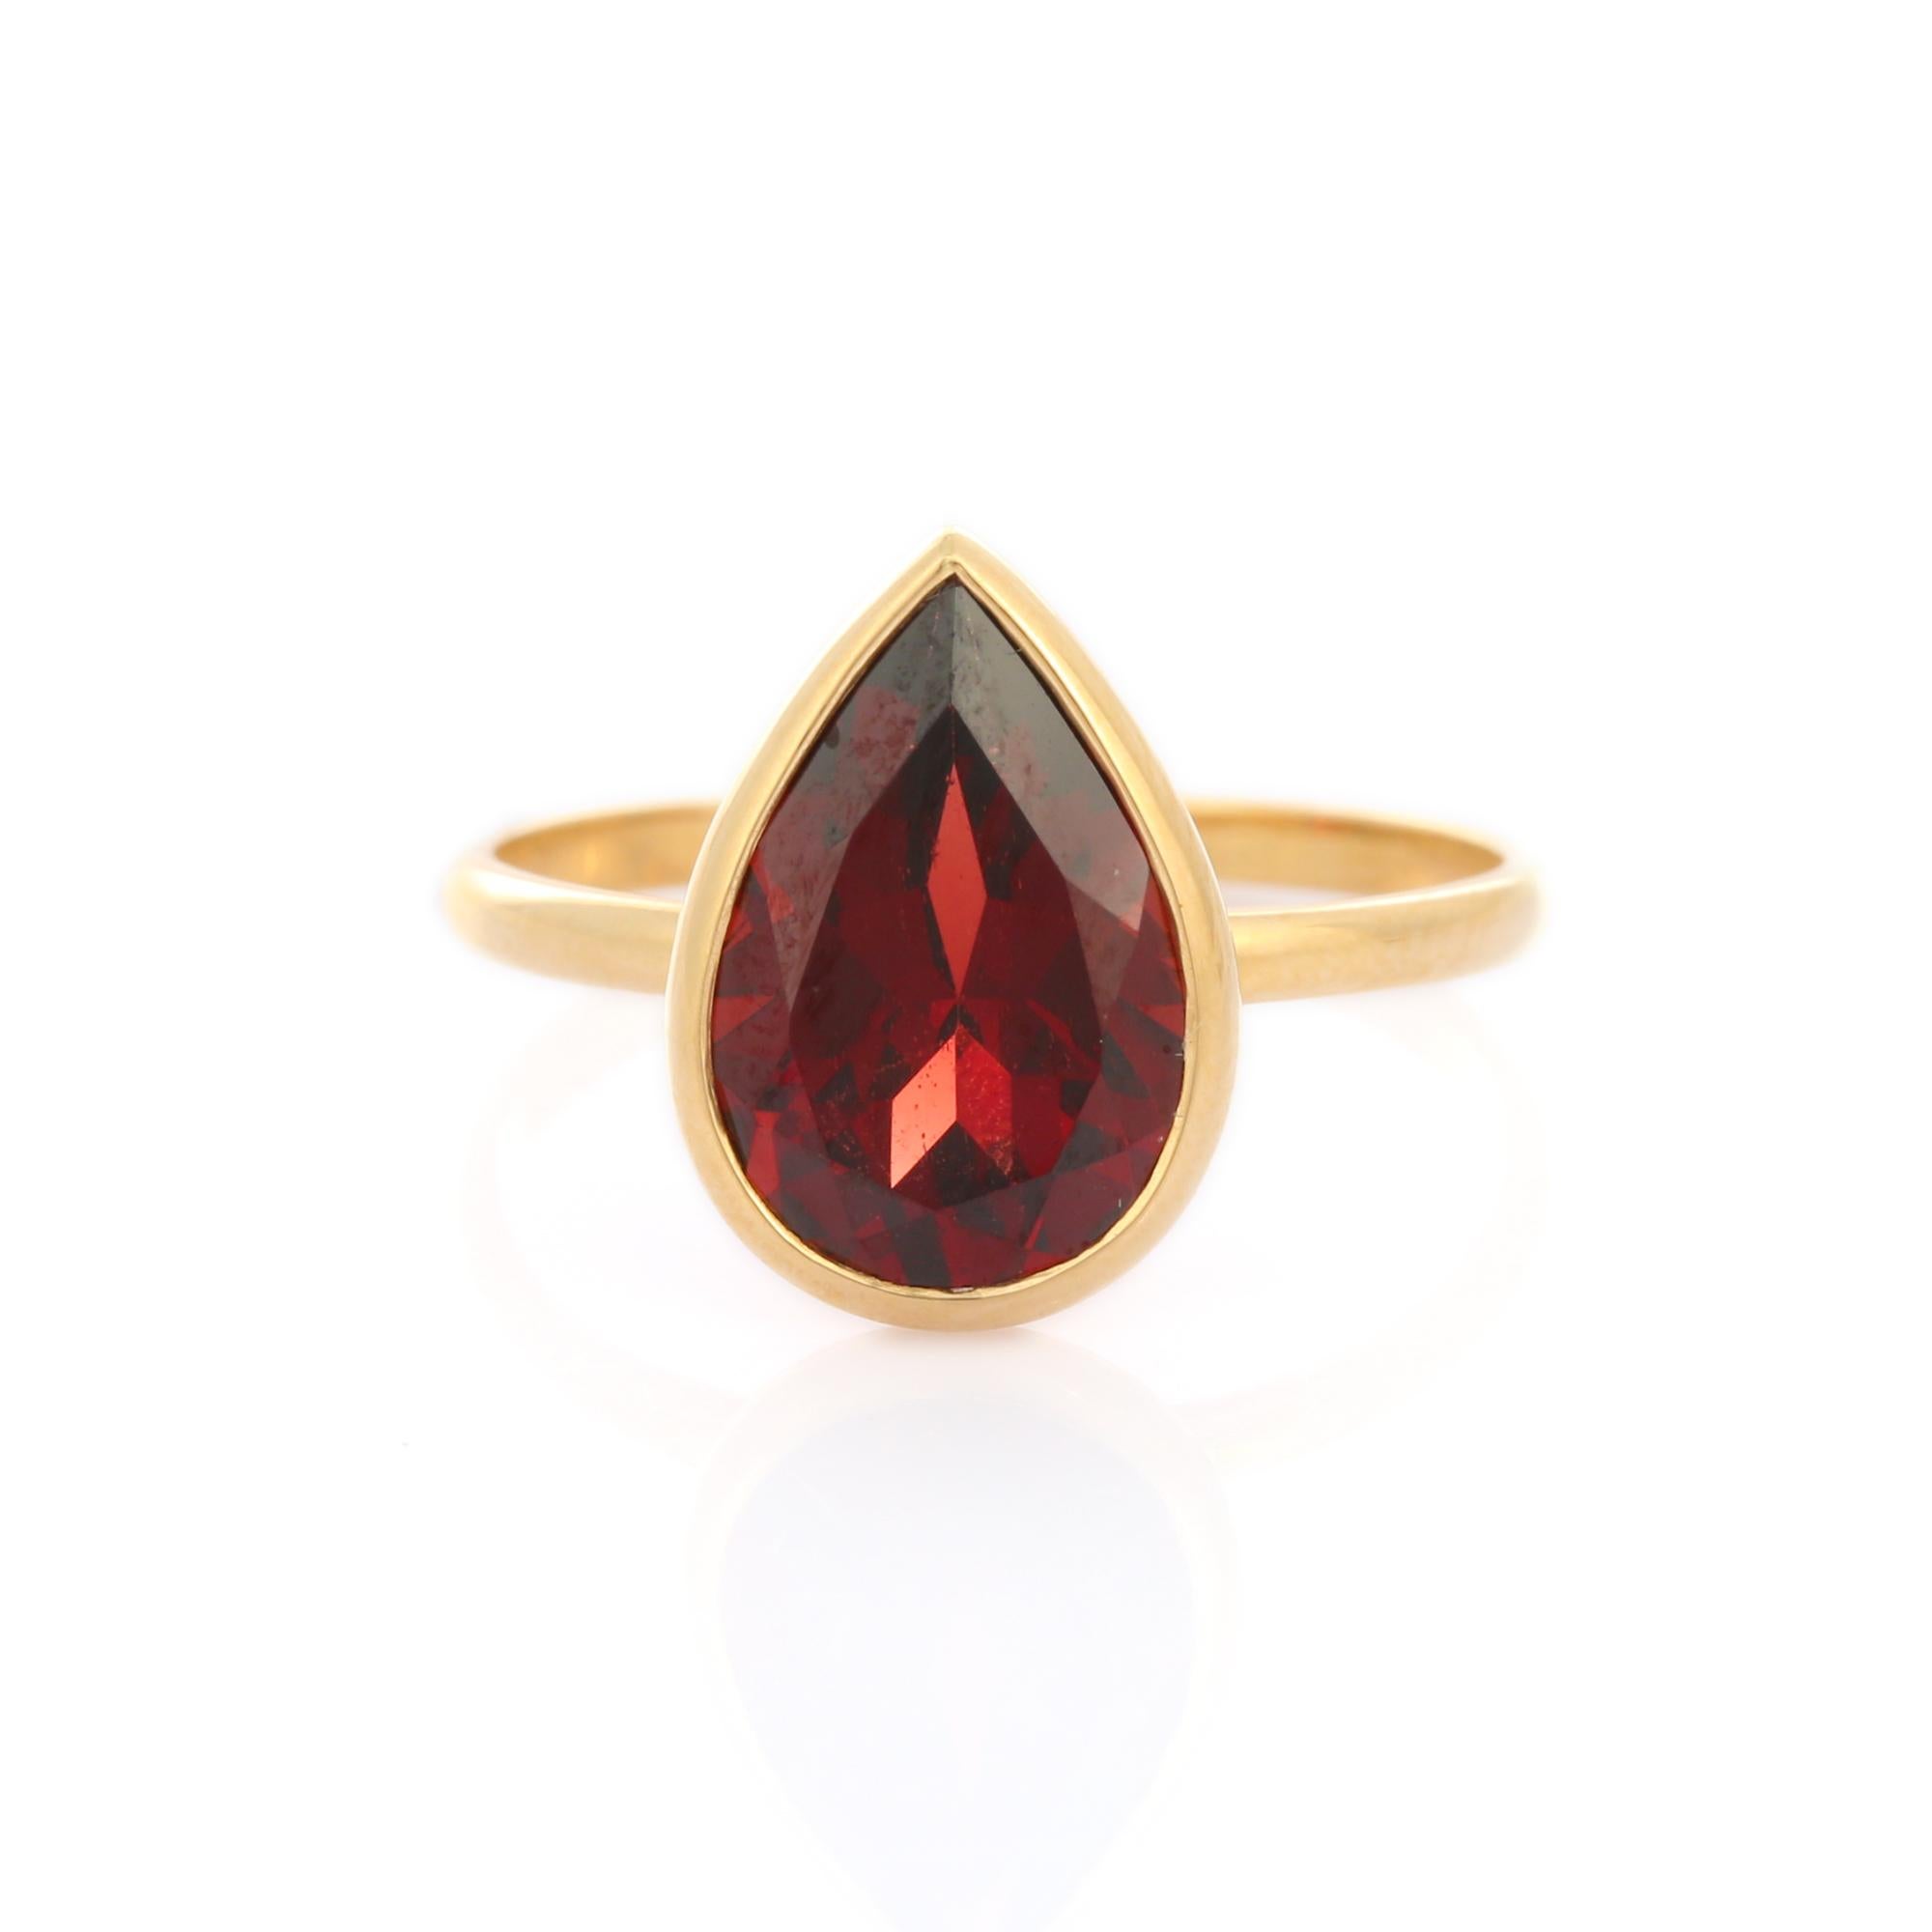 For Sale:  3.5 Carat Pear Cut Garnet Cocktail Ring in 18K Yellow Gold 4